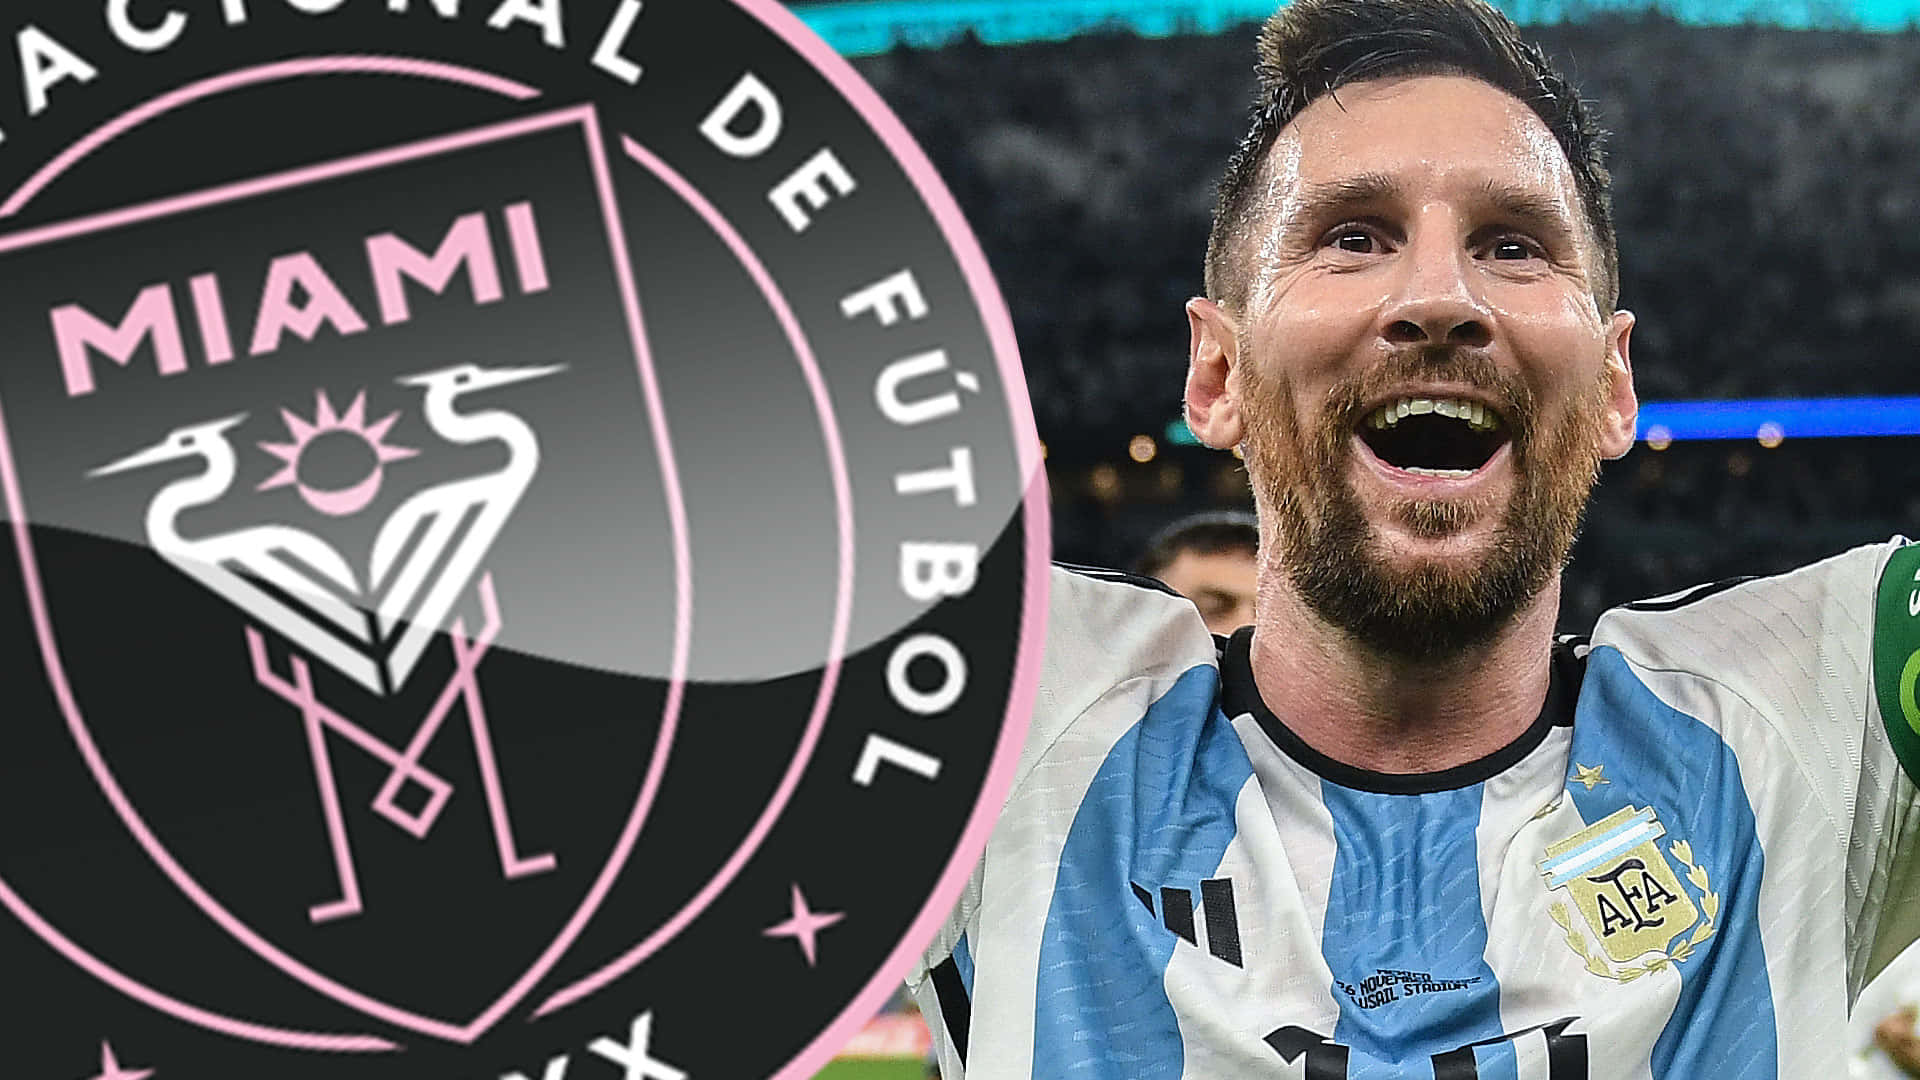 Download Inter Miami FC And Lionel Messi Cool Graphic Art Wallpapers